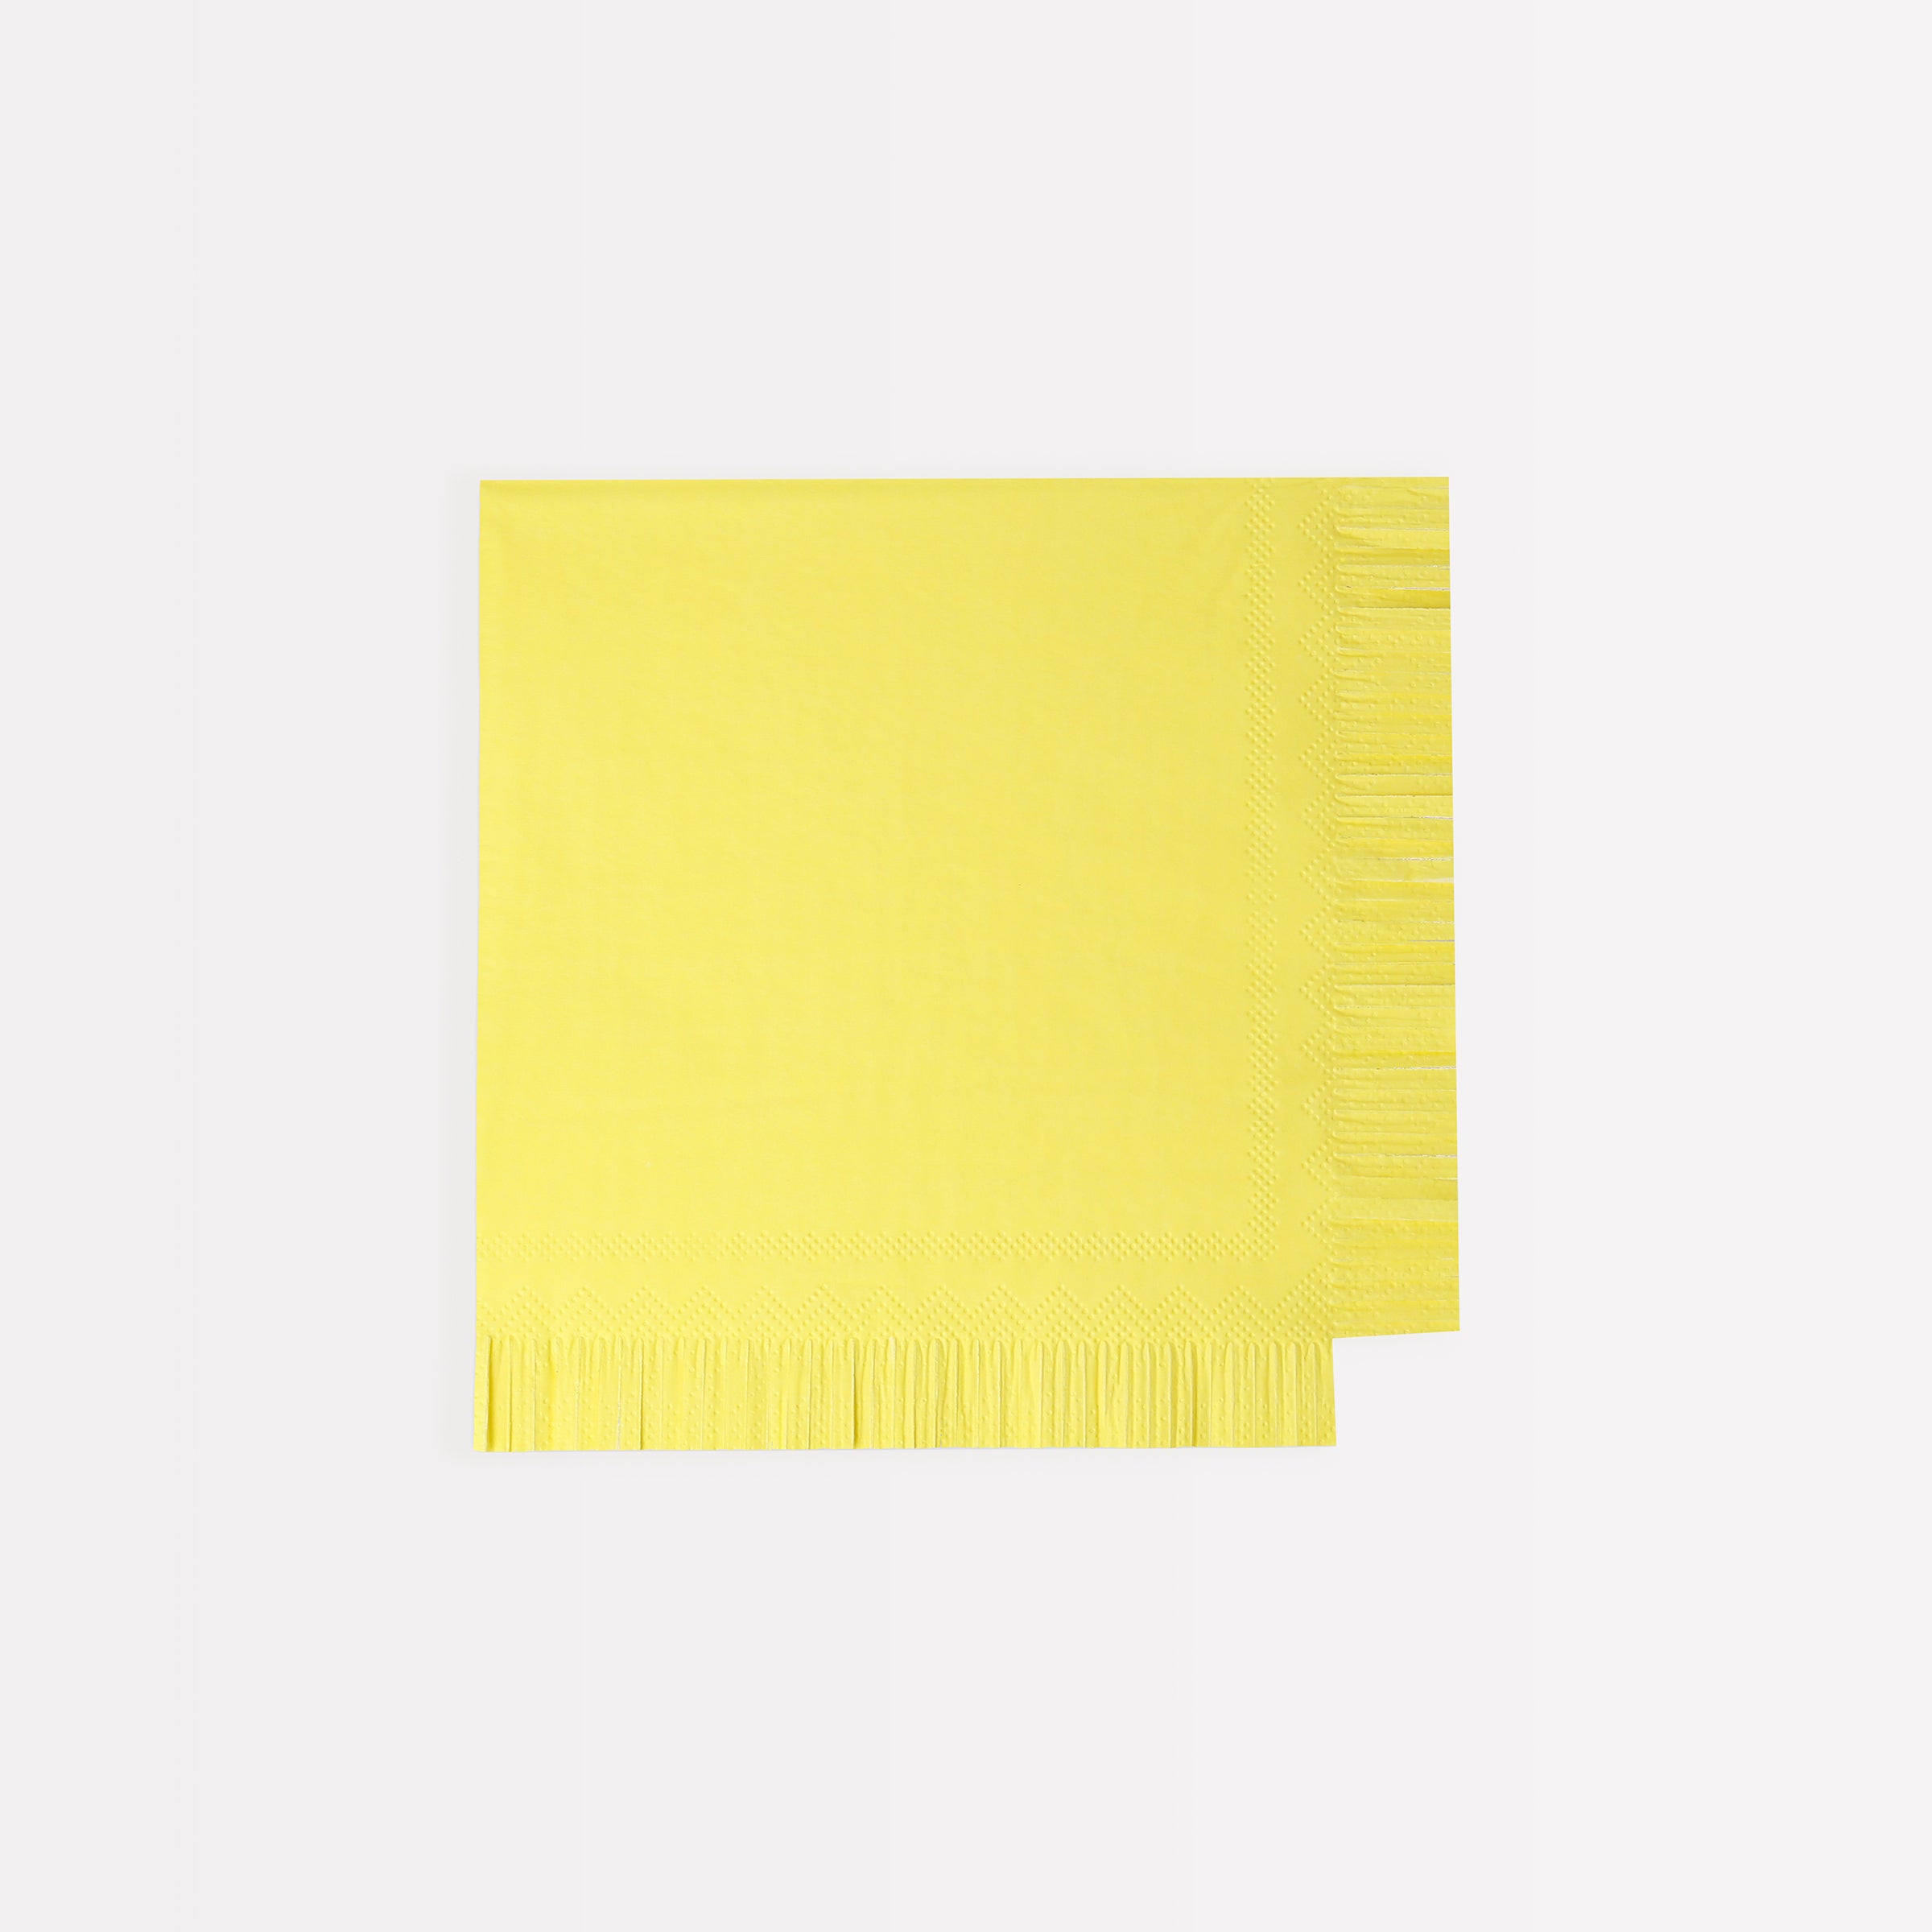 Our party napkins, in bright colors, are the ideal birthday napkins.